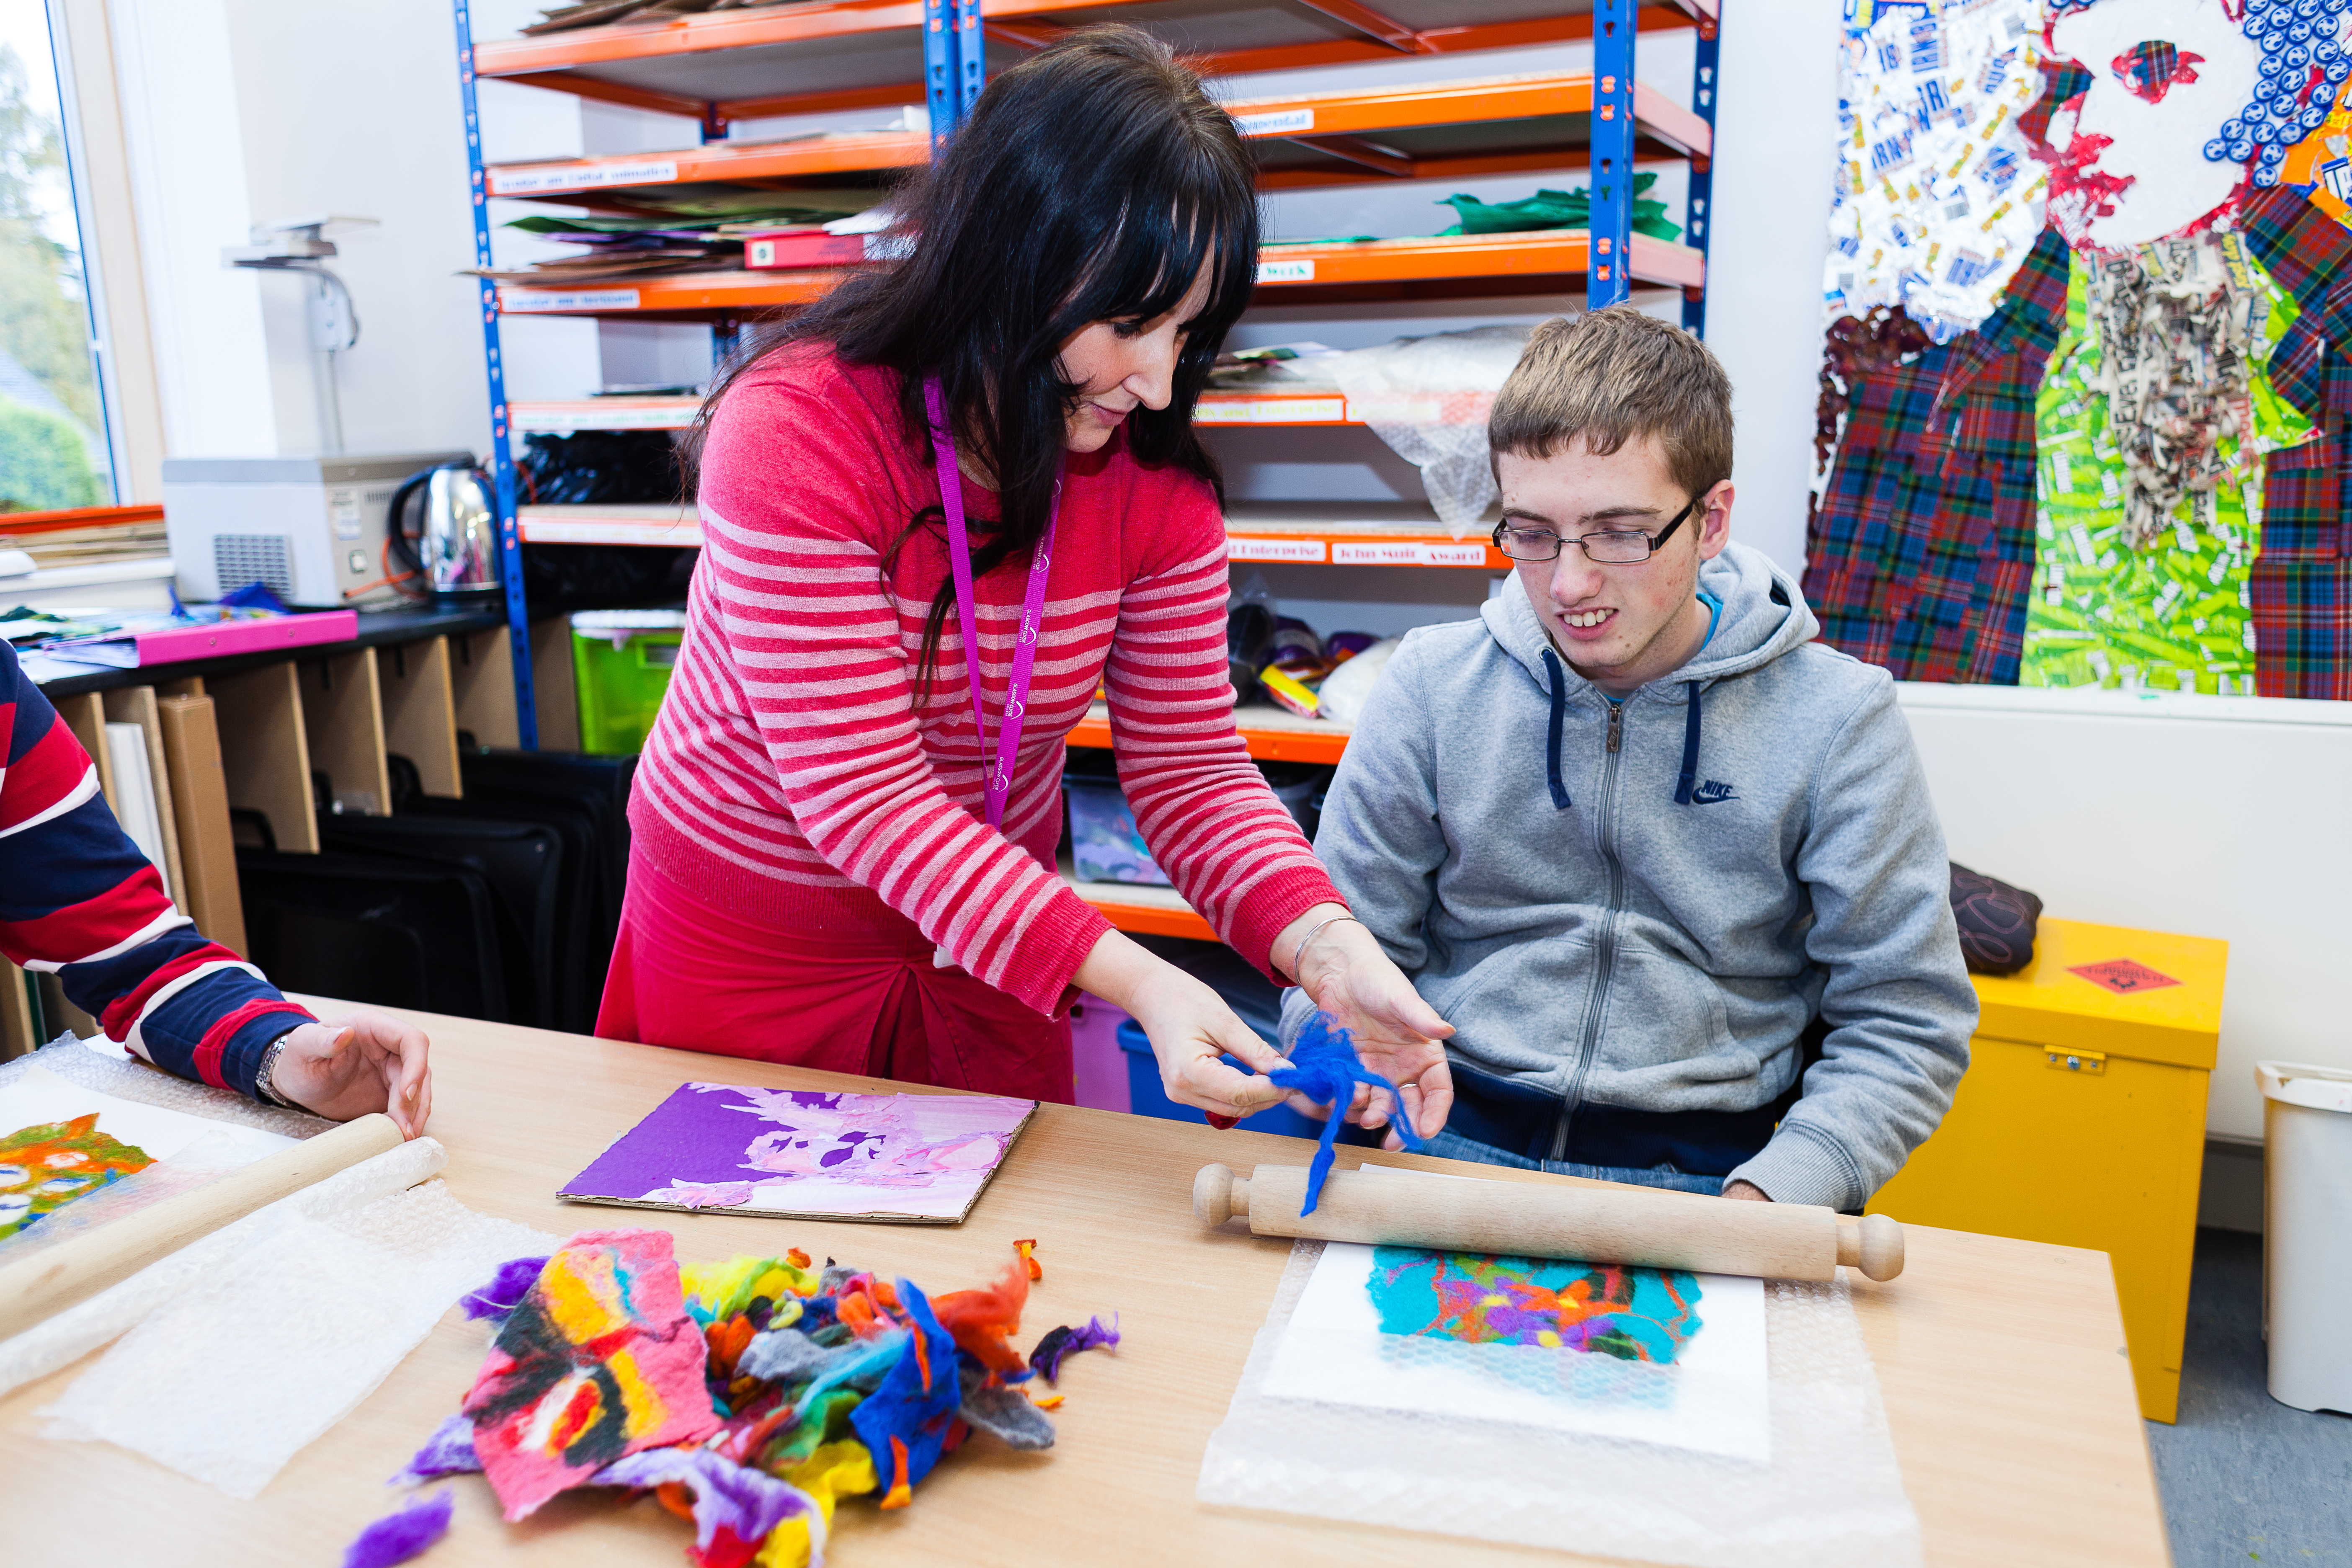 Additional Support For Learning Student And Lecturer Demonstrating Felt Making Techniques